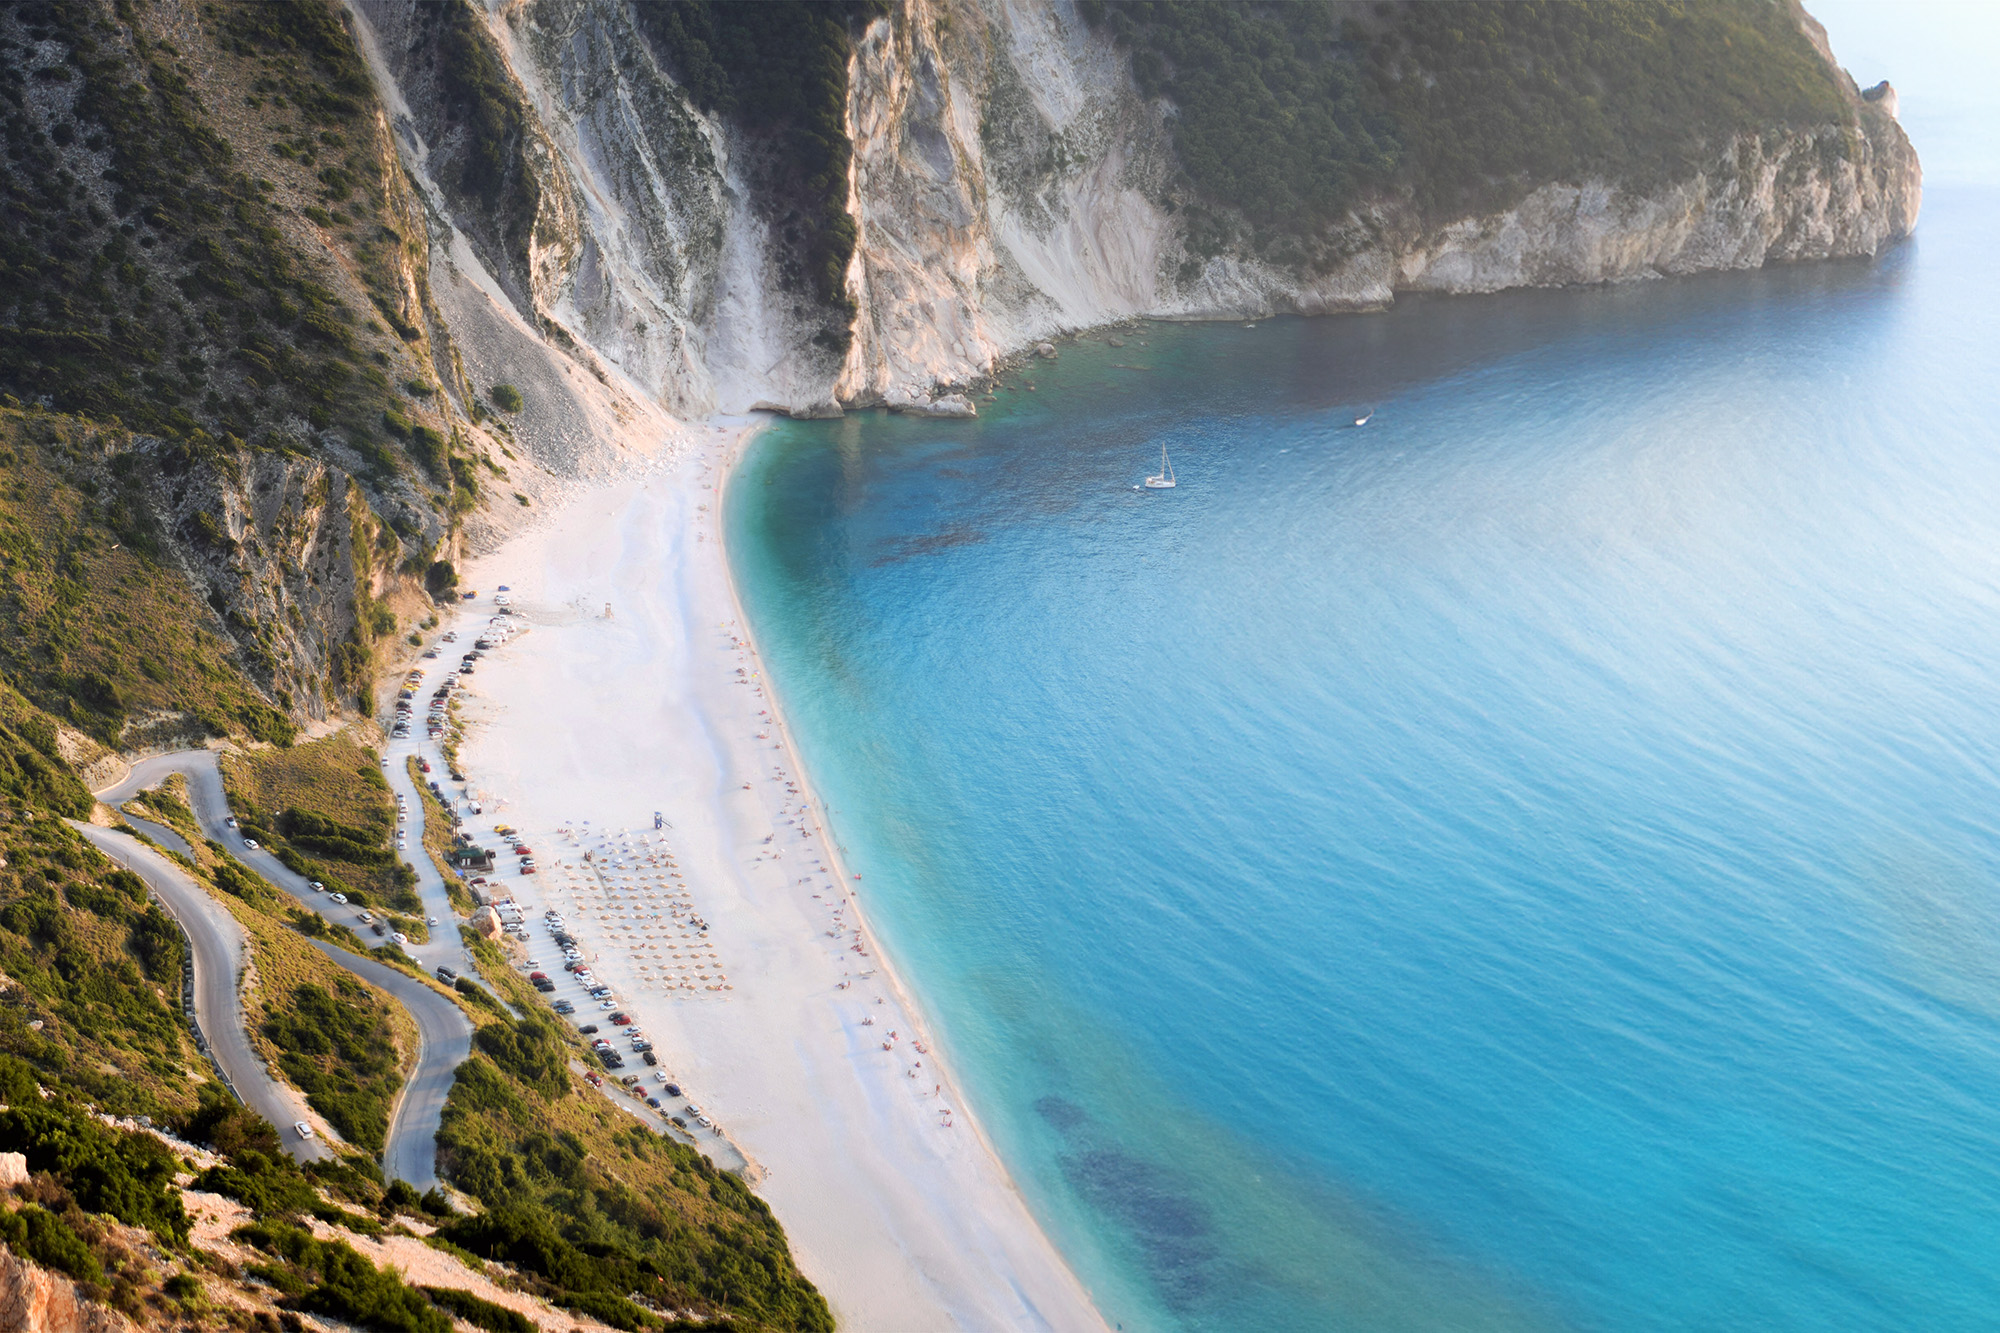  Surrounded by steep limestone cliffs, this iconic beach offers stunning panoramic views of the Ionian Sea.